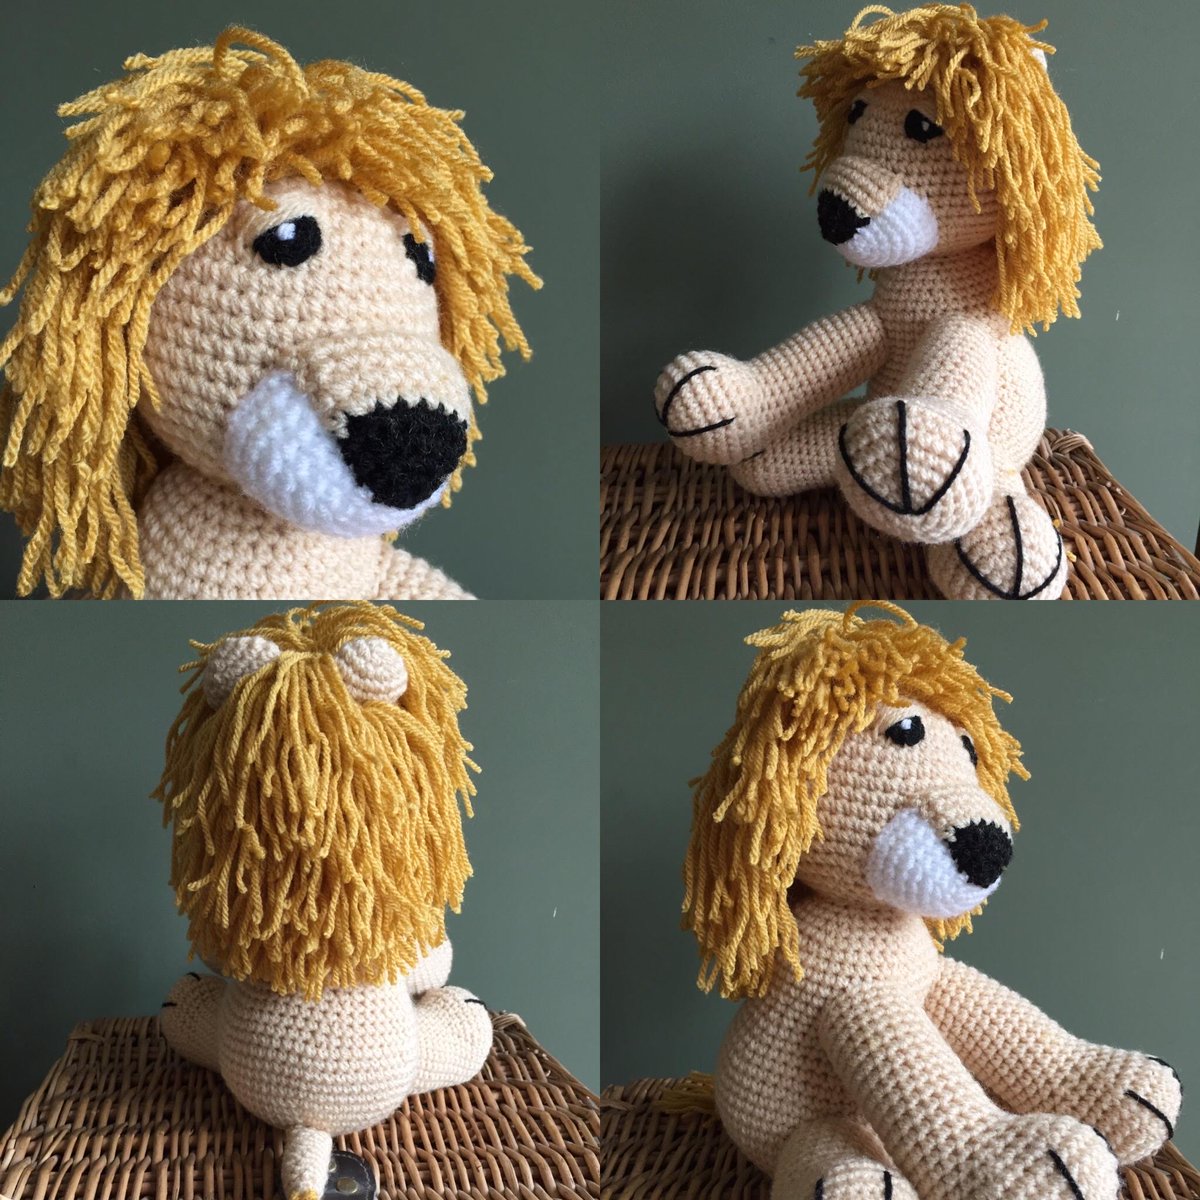 PaintedbyCarol: RT @Tanyawarren: King of the jungle 🦁  This roarsome chap is available from my Etsy shop right now.  Just £20 + p&p he would make a super gift 😊

etsy.me/3uxq1Ju

#lion #handmade #firsttmaster #craftyfeatures #etsy #MHHSBD